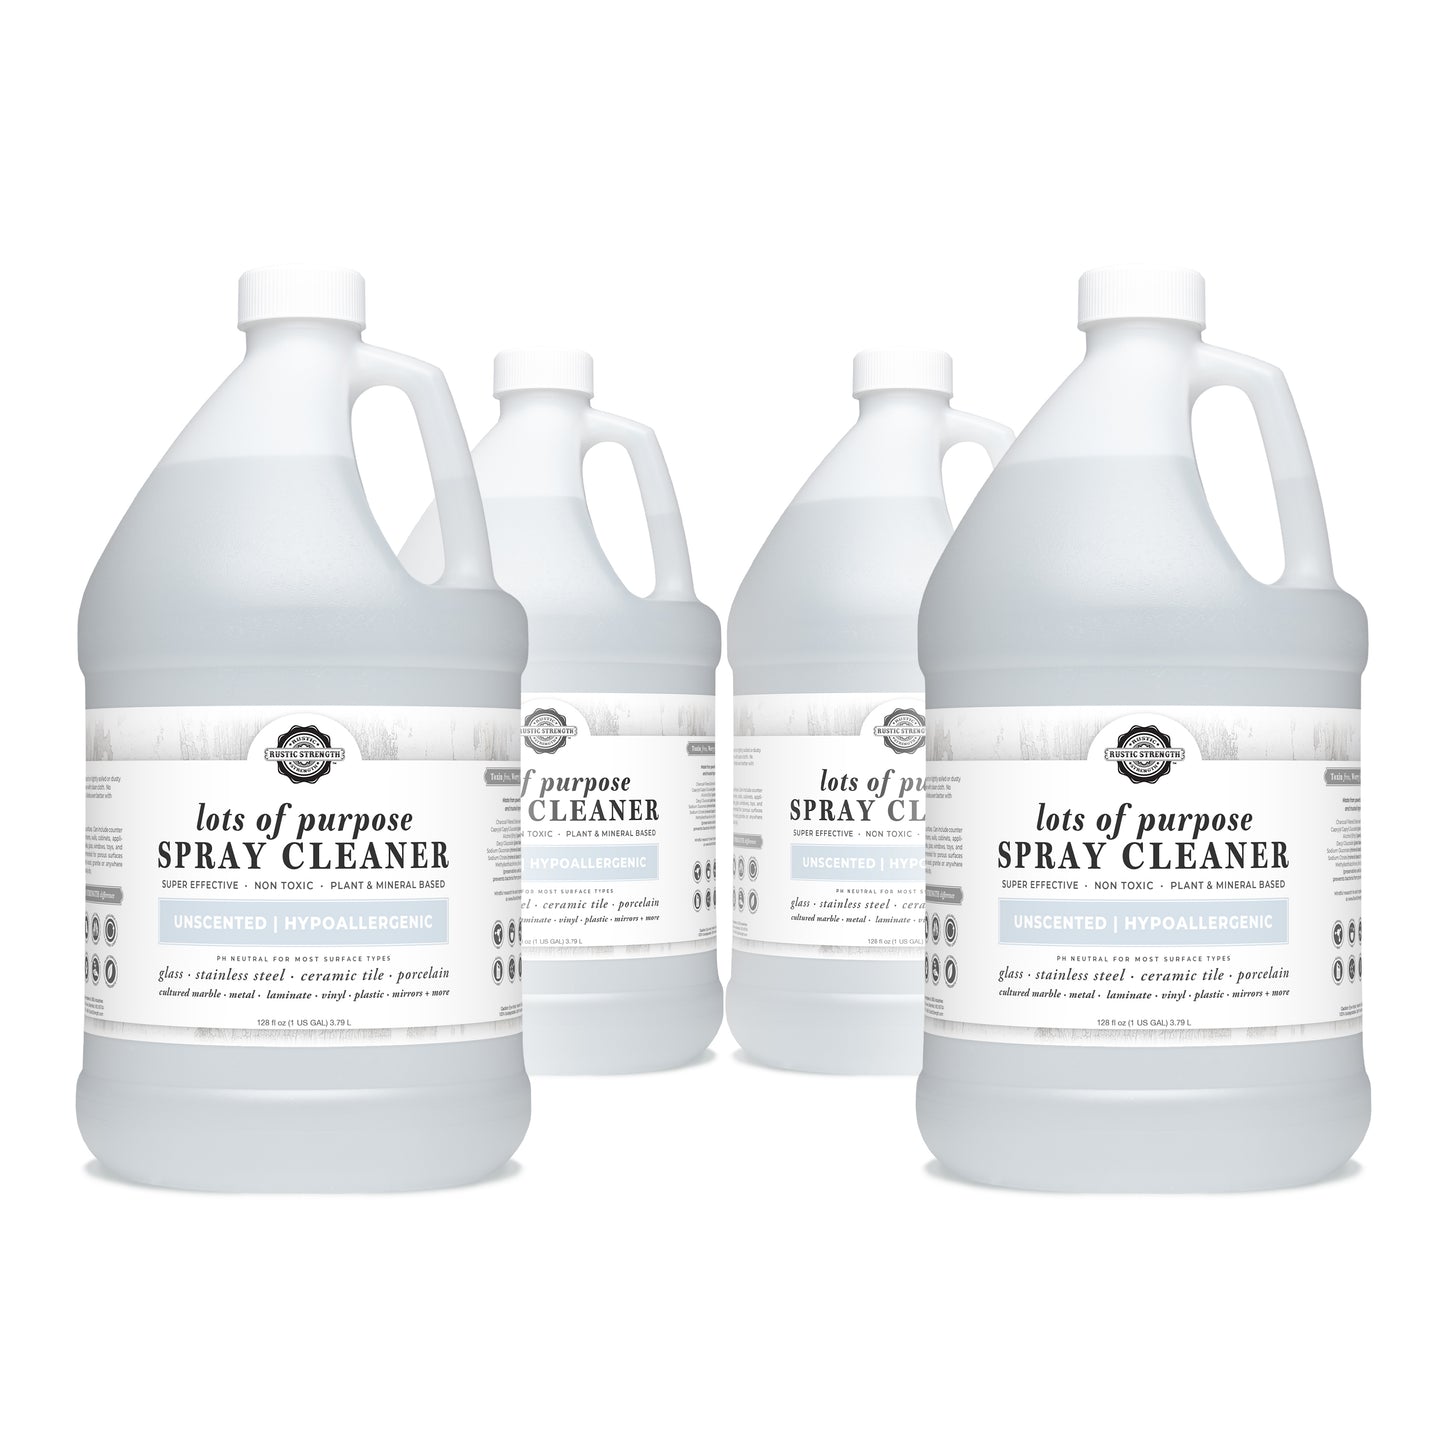 Lots of Purpose Spray Cleaner | Ready-To-Use | Our Popular Scents